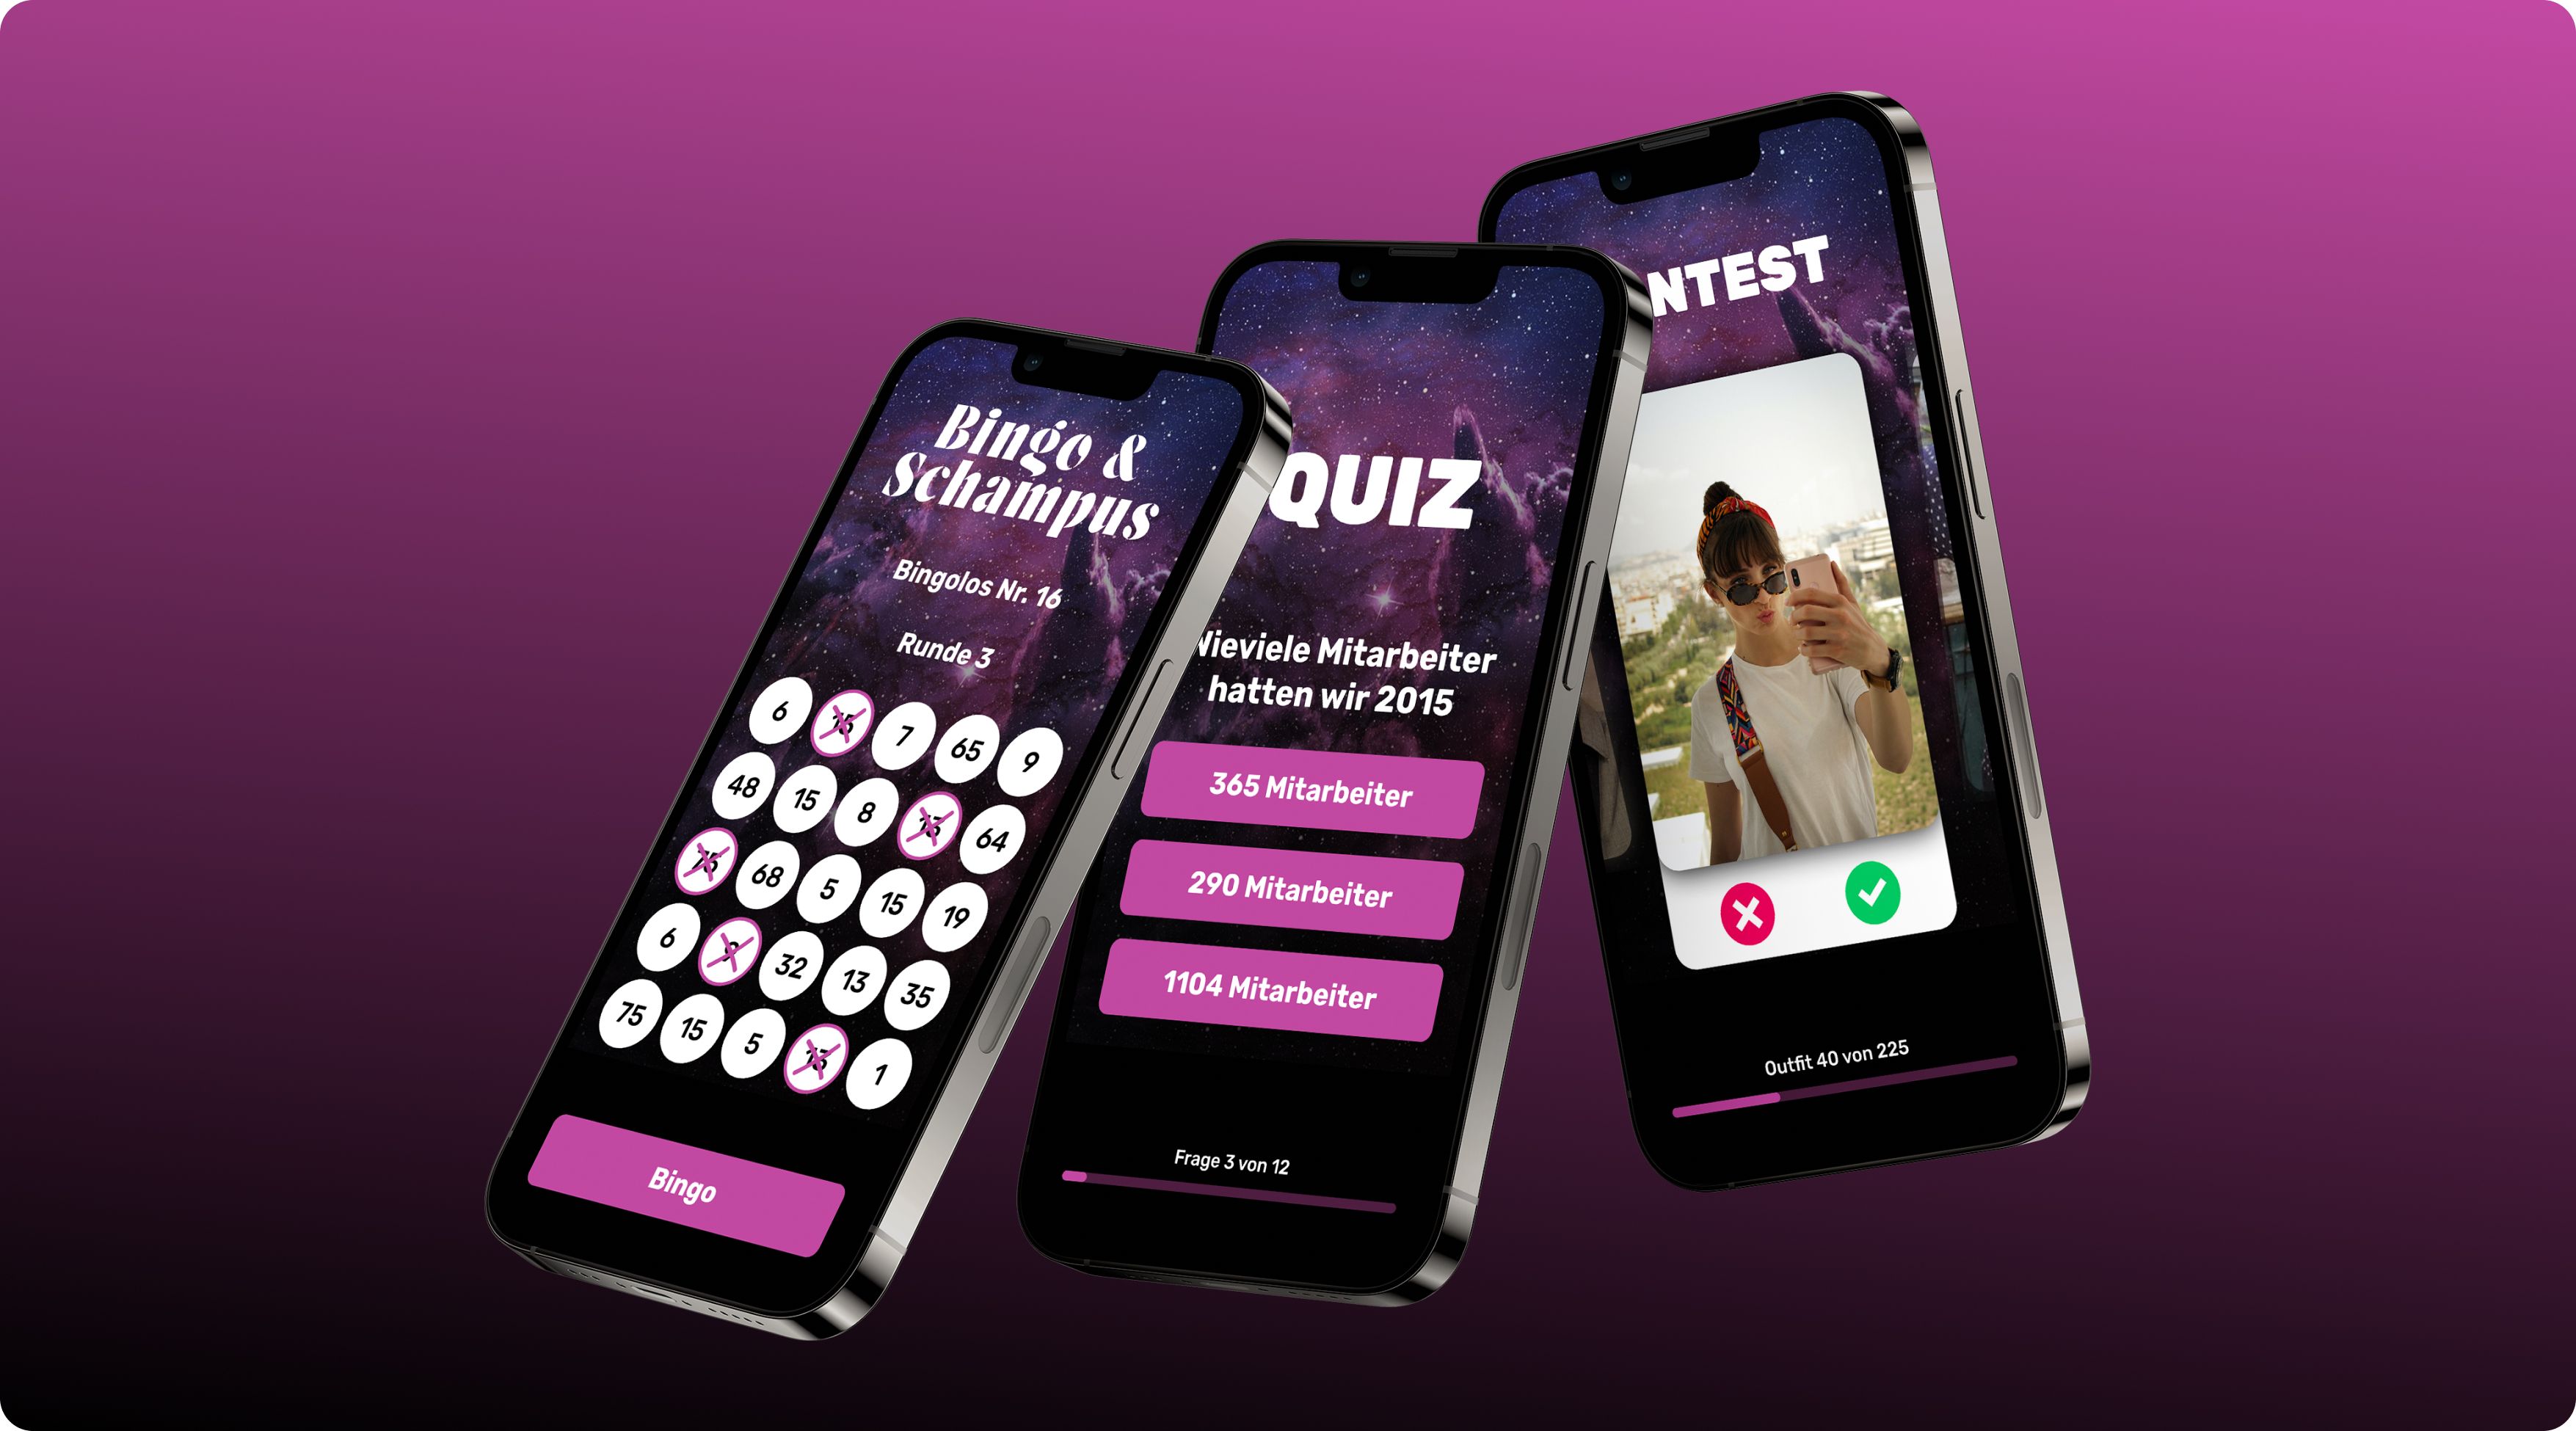 An early Design state of our “Bingo & Champagne” Webapp with quiz and voting integration. 